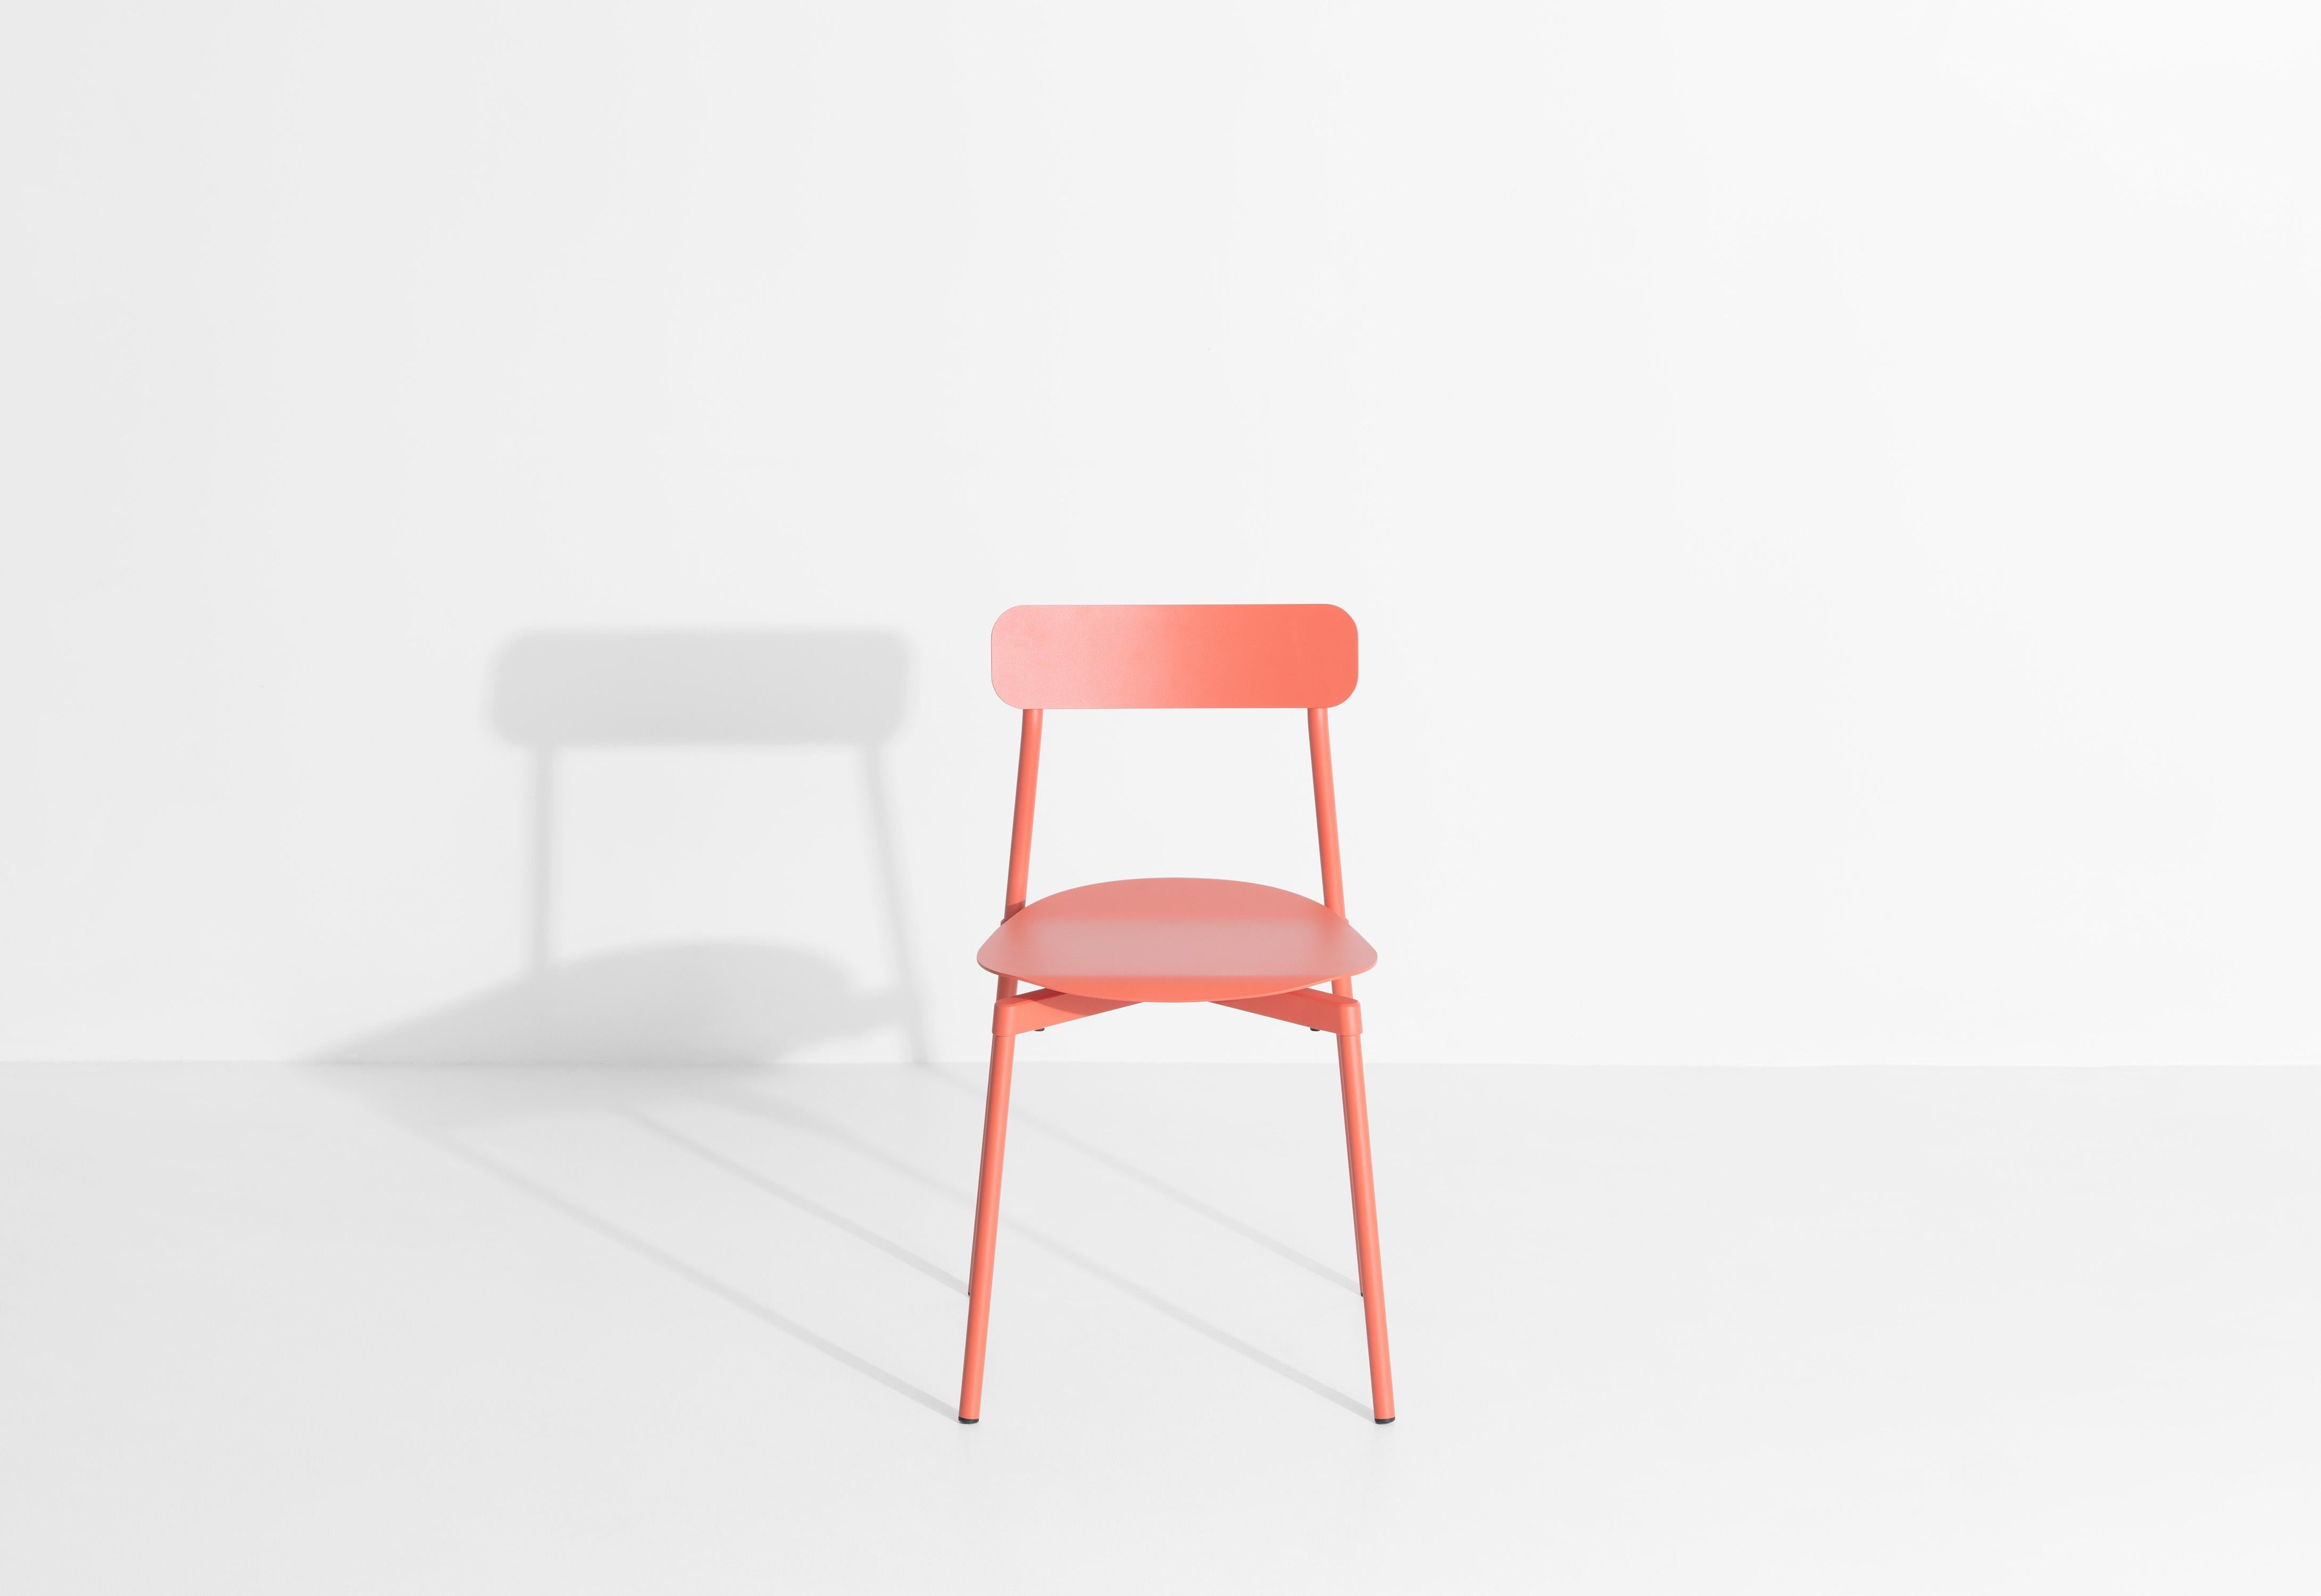 Contemporary Petite Friture Fromme Chair in Coral Aluminium by Tom Chung, 2019 For Sale